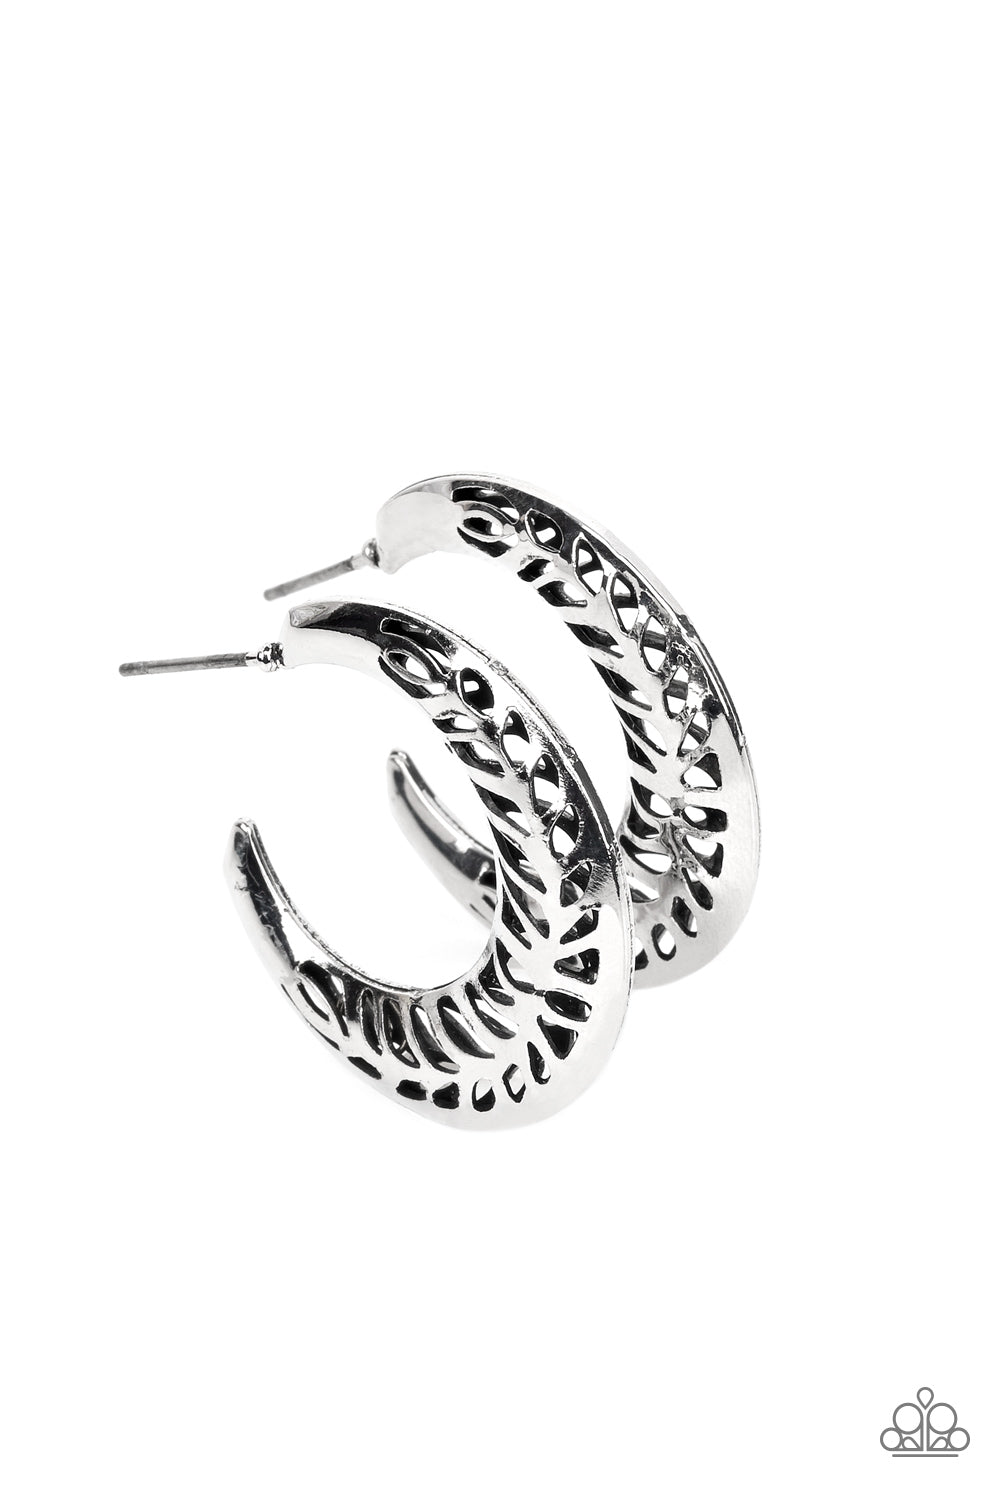 Wanderlust Wilderness Silver Hoop Earring - Paparazzi Accessories  Airy leafy cutouts climb two curved silver frames that join into a rustic hoop, resulting in a seasonal shimmer. Earring attaches to a standard post fitting. Hoop measures approximately 1 1/4" in diameter.  Sold as one pair of hoop earrings.